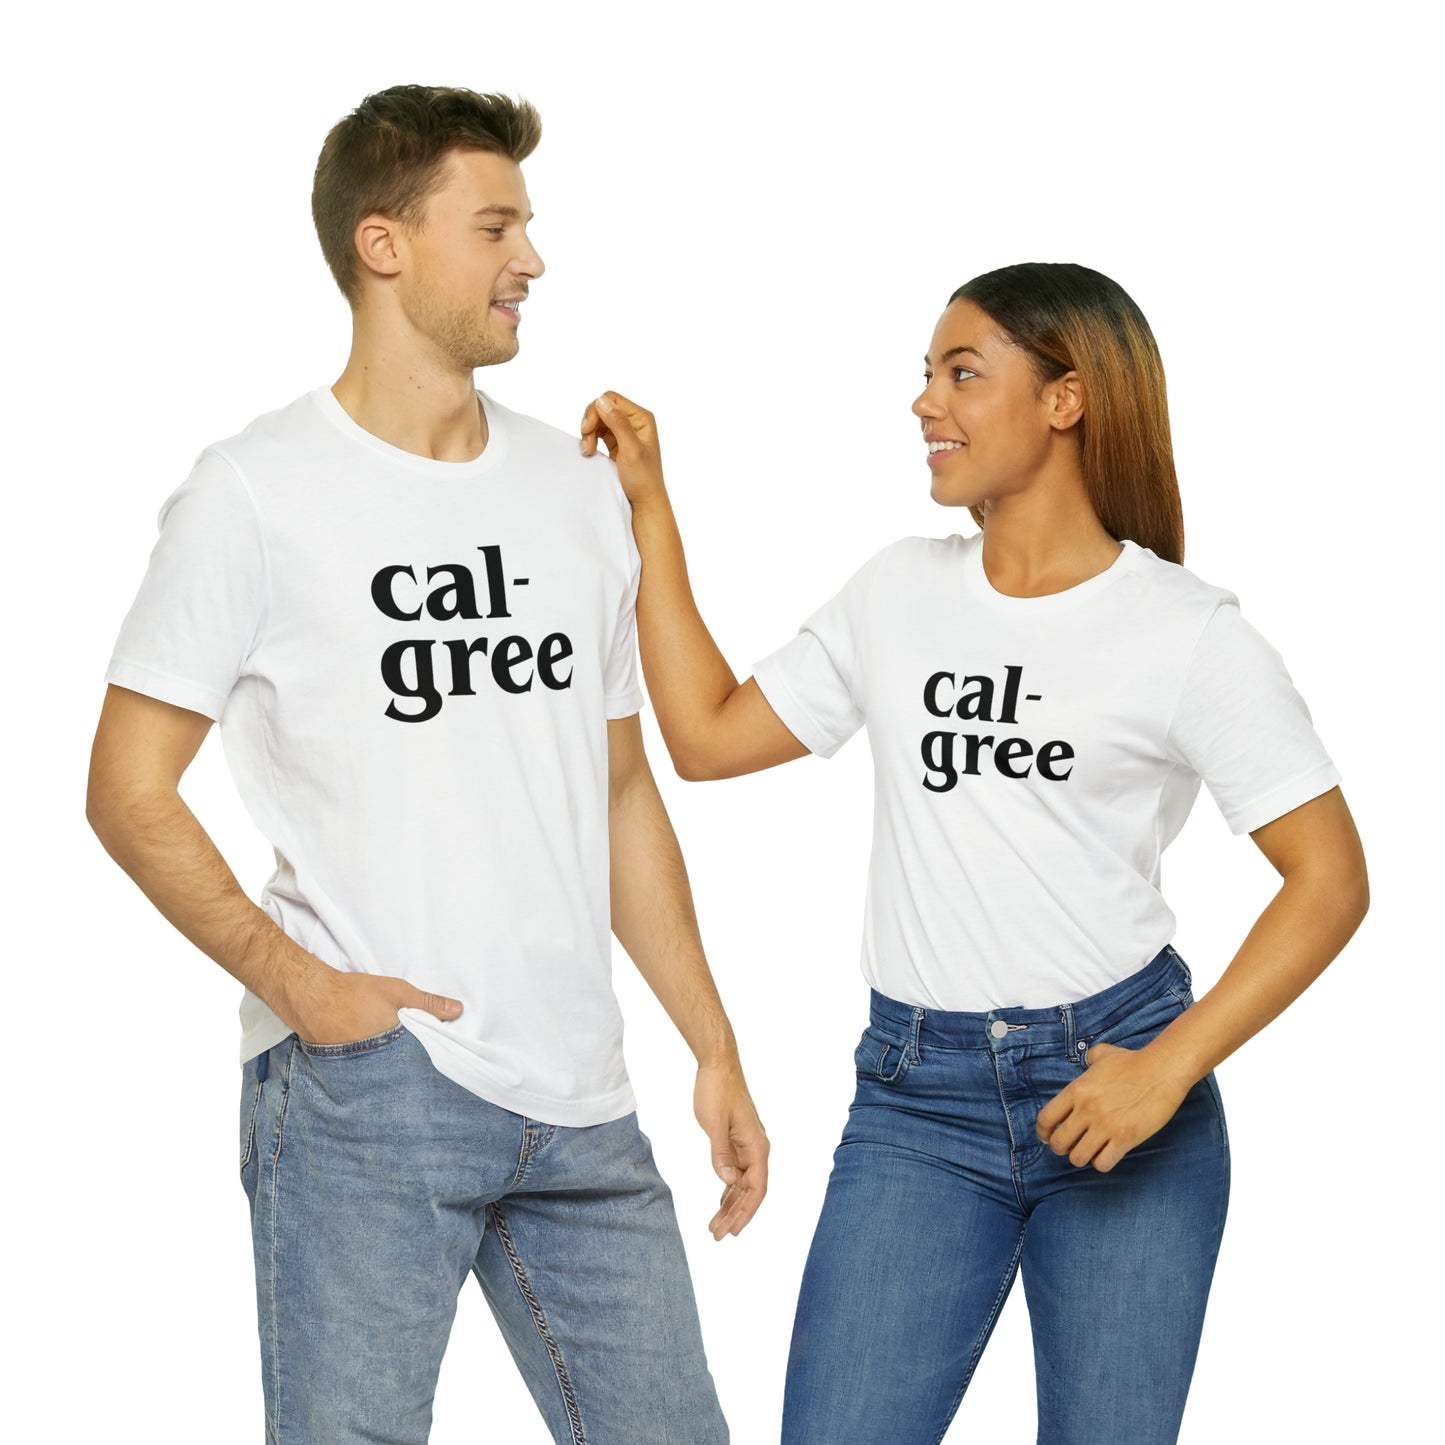 Classic Calgree Collection - Unisex Jersey Short Sleeve Tee